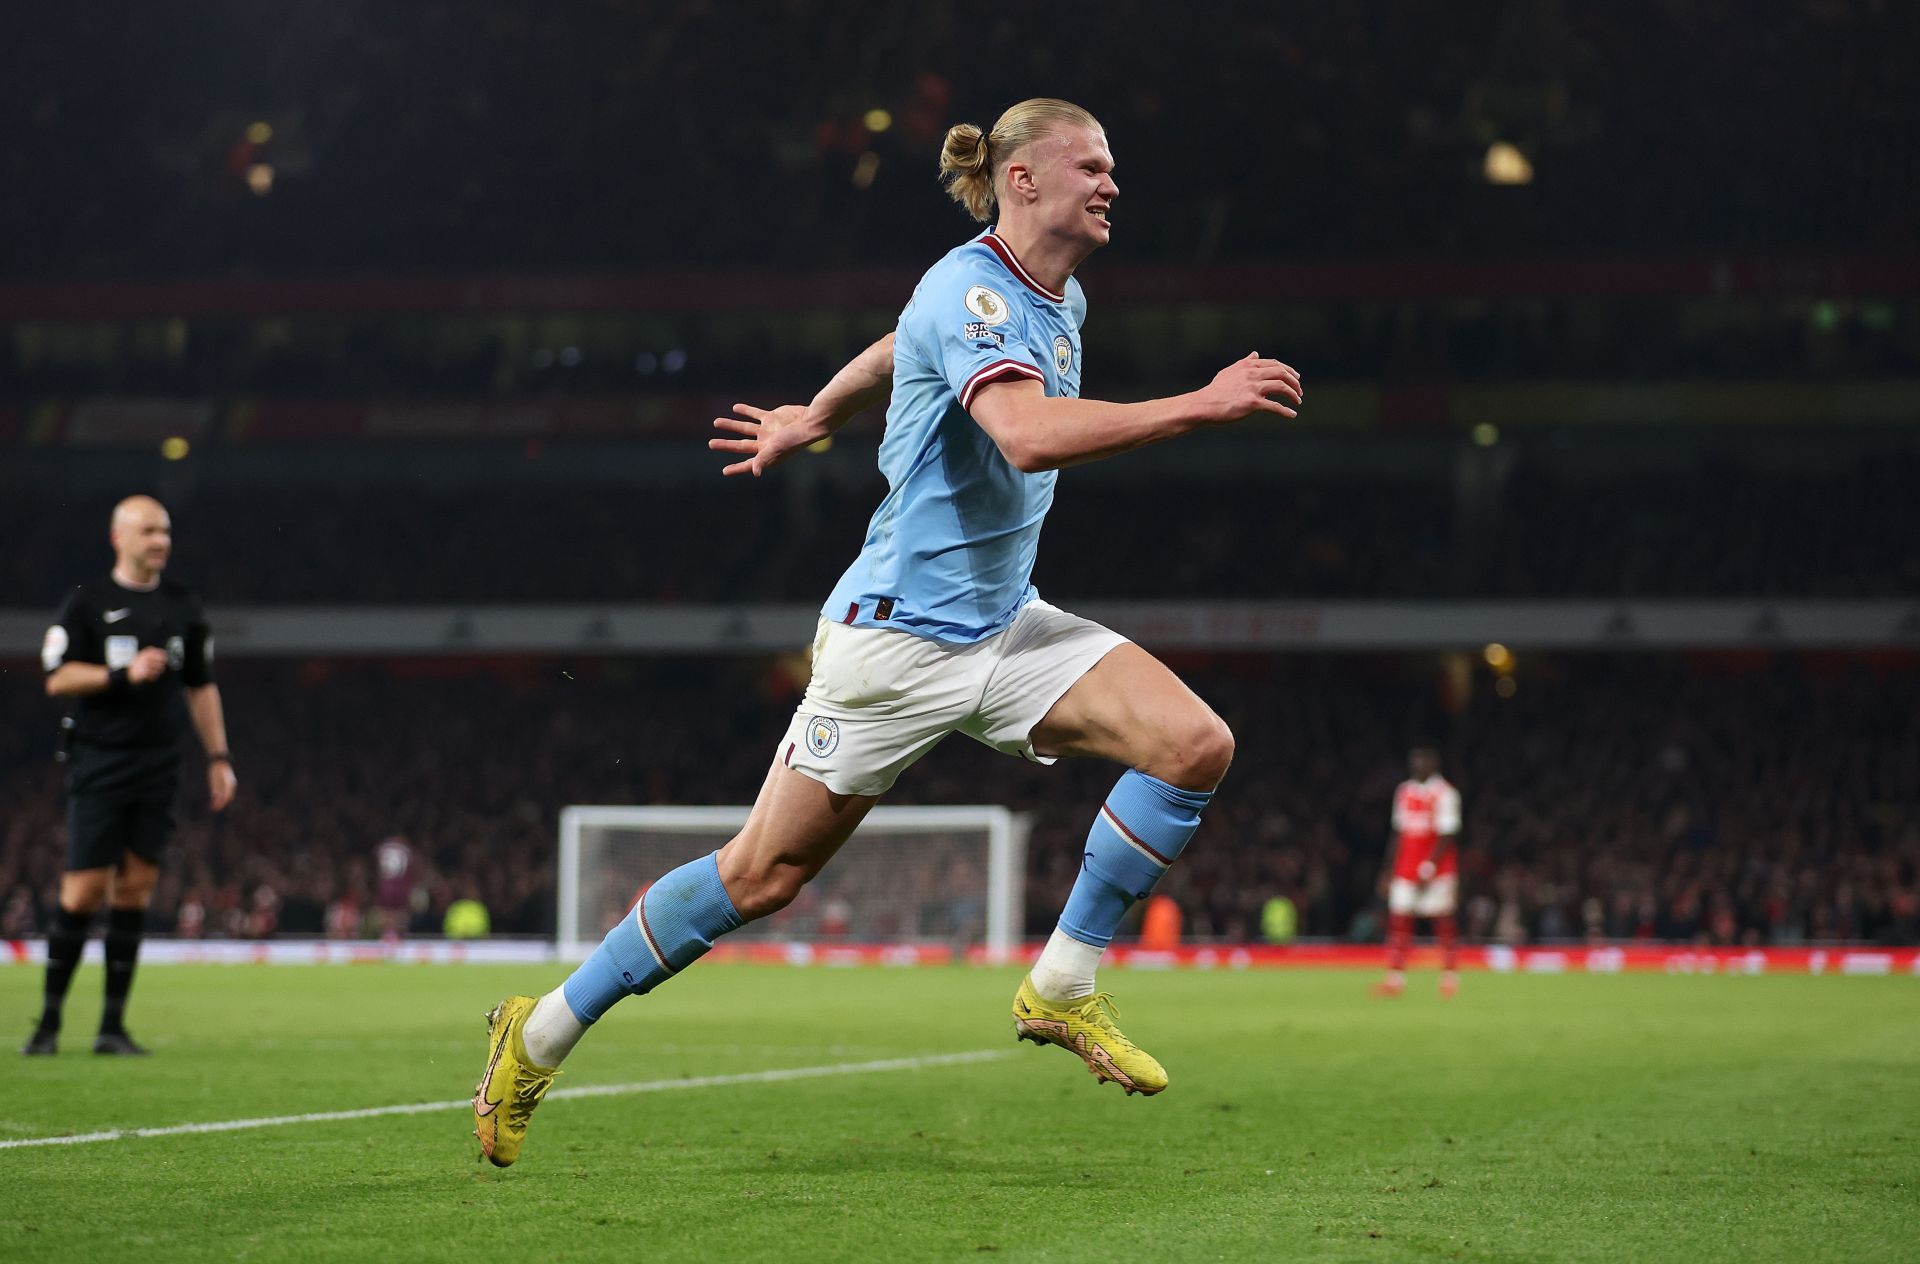 Is Erling Haaland the best finisher in football right now?